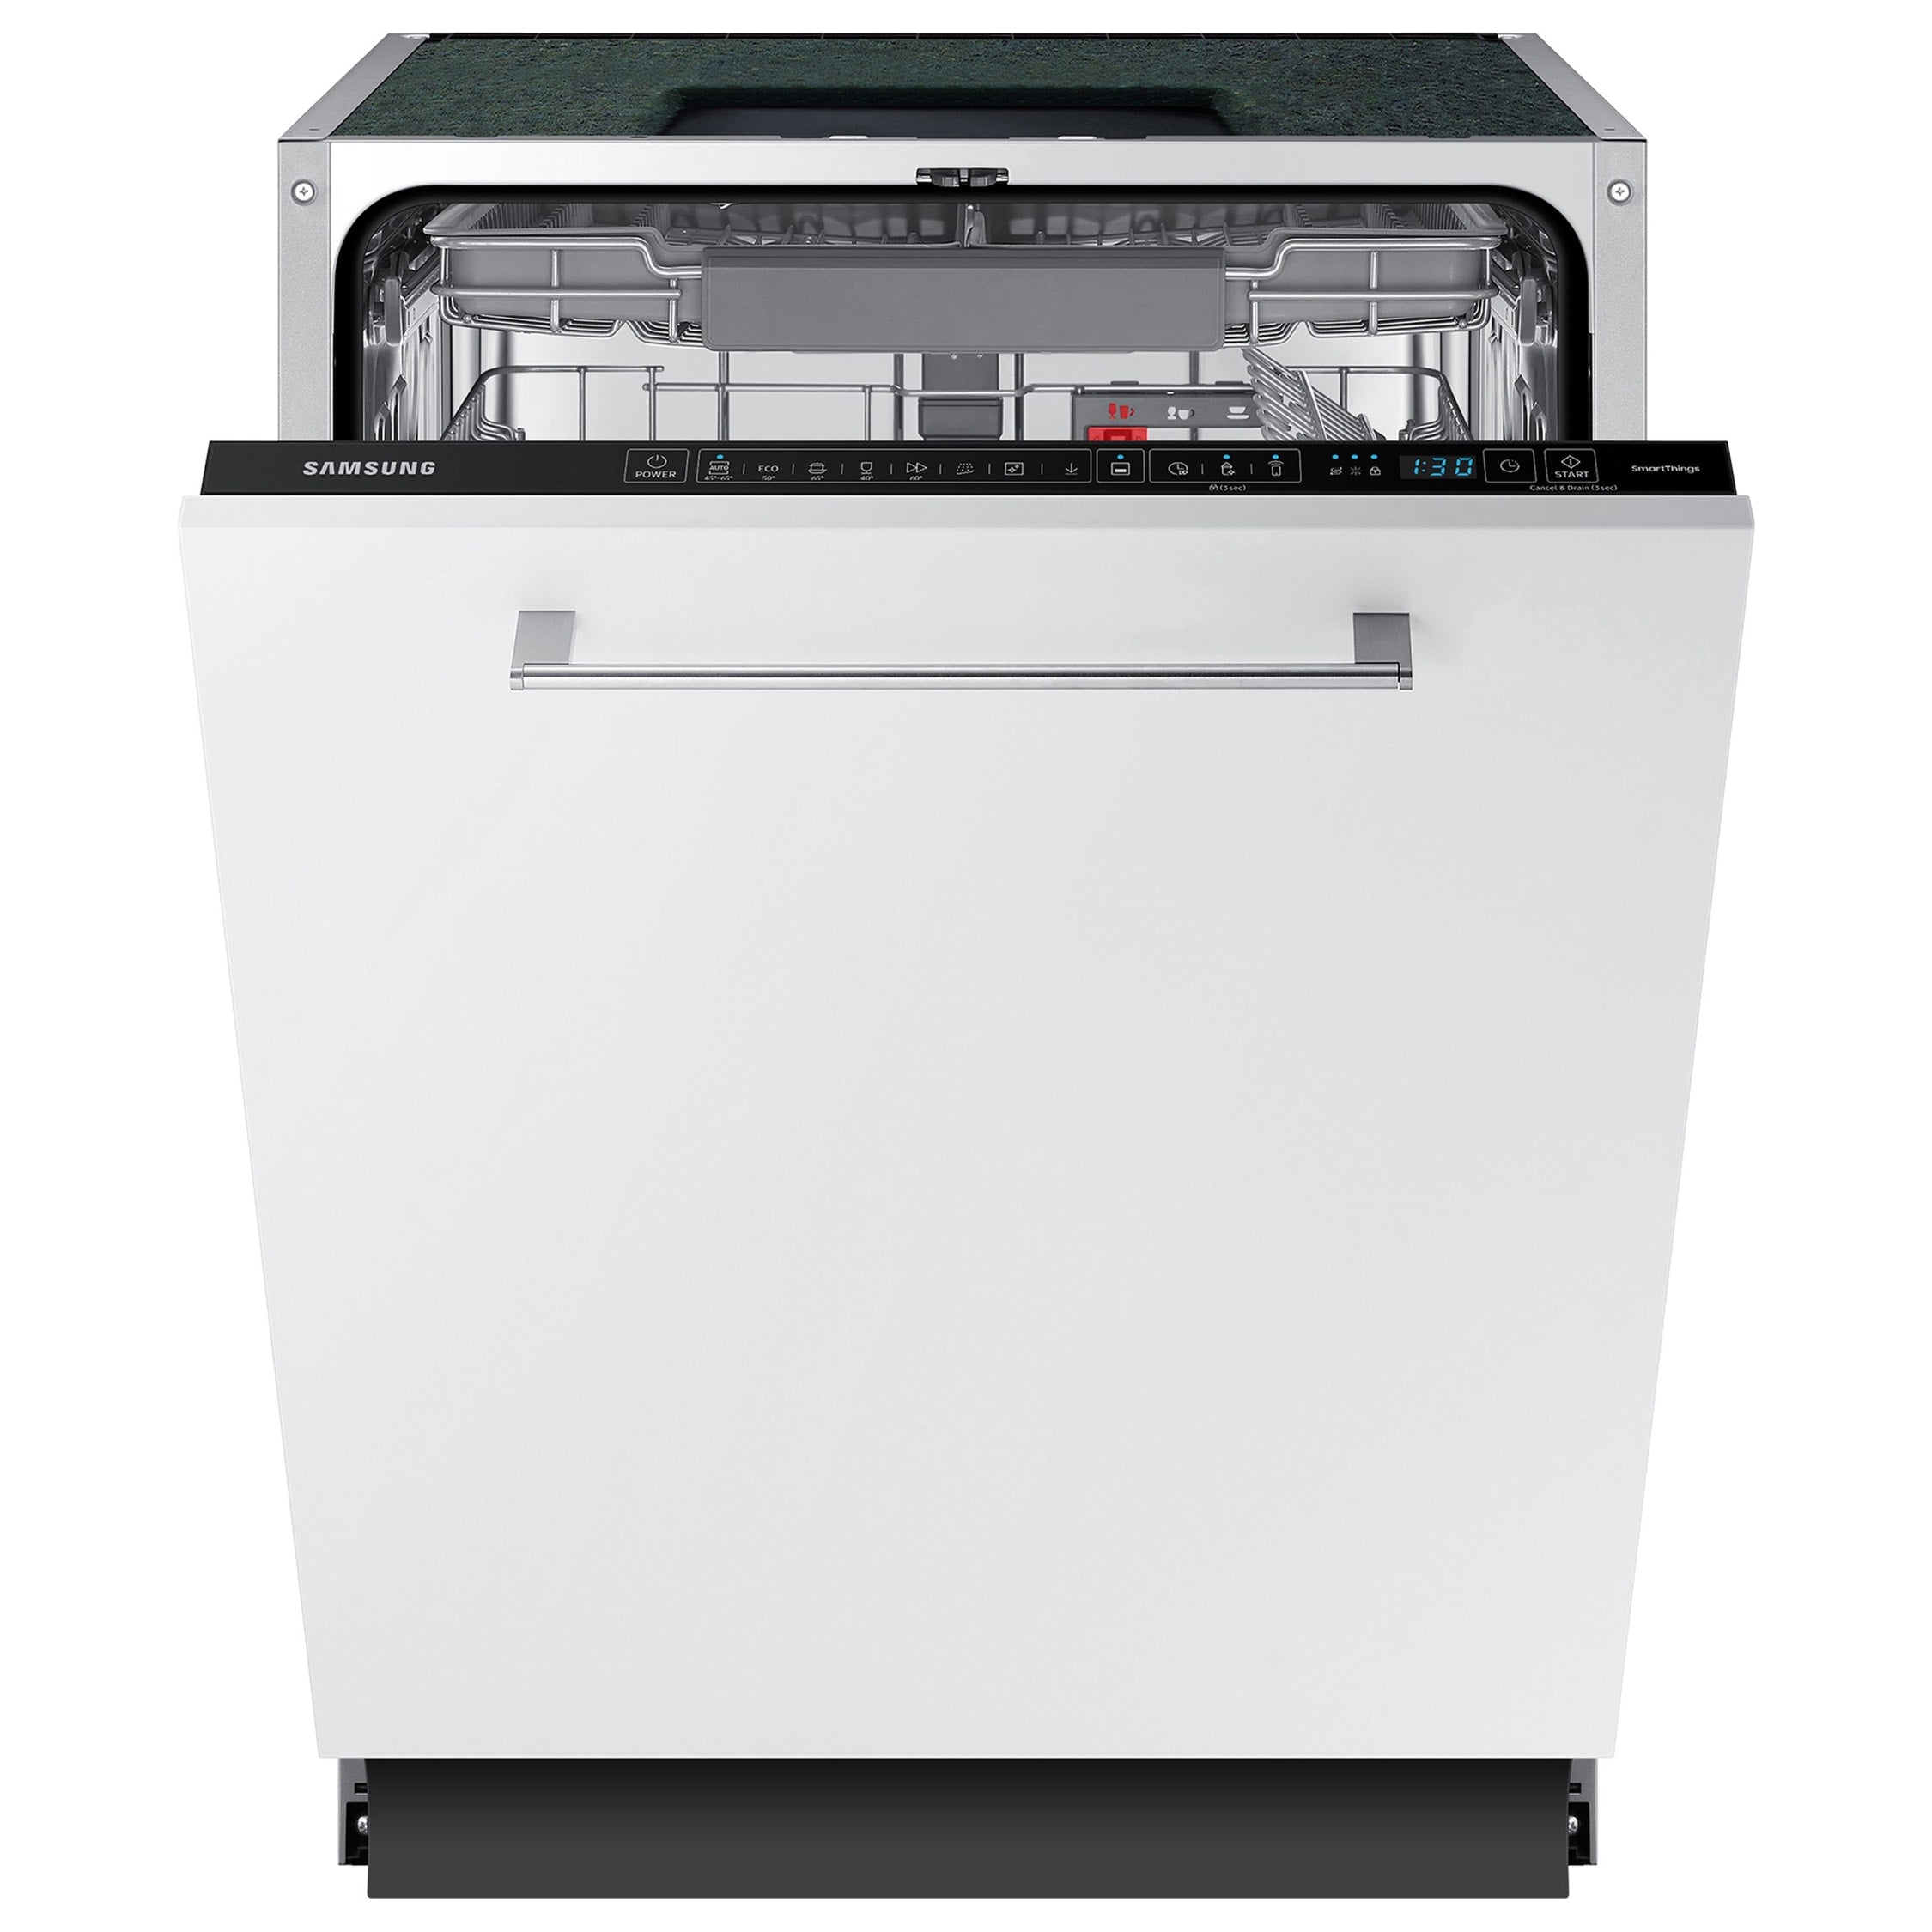 Samsung DW60A8060BB Integrated Dishwasher 14 Place 60cm GRADE A